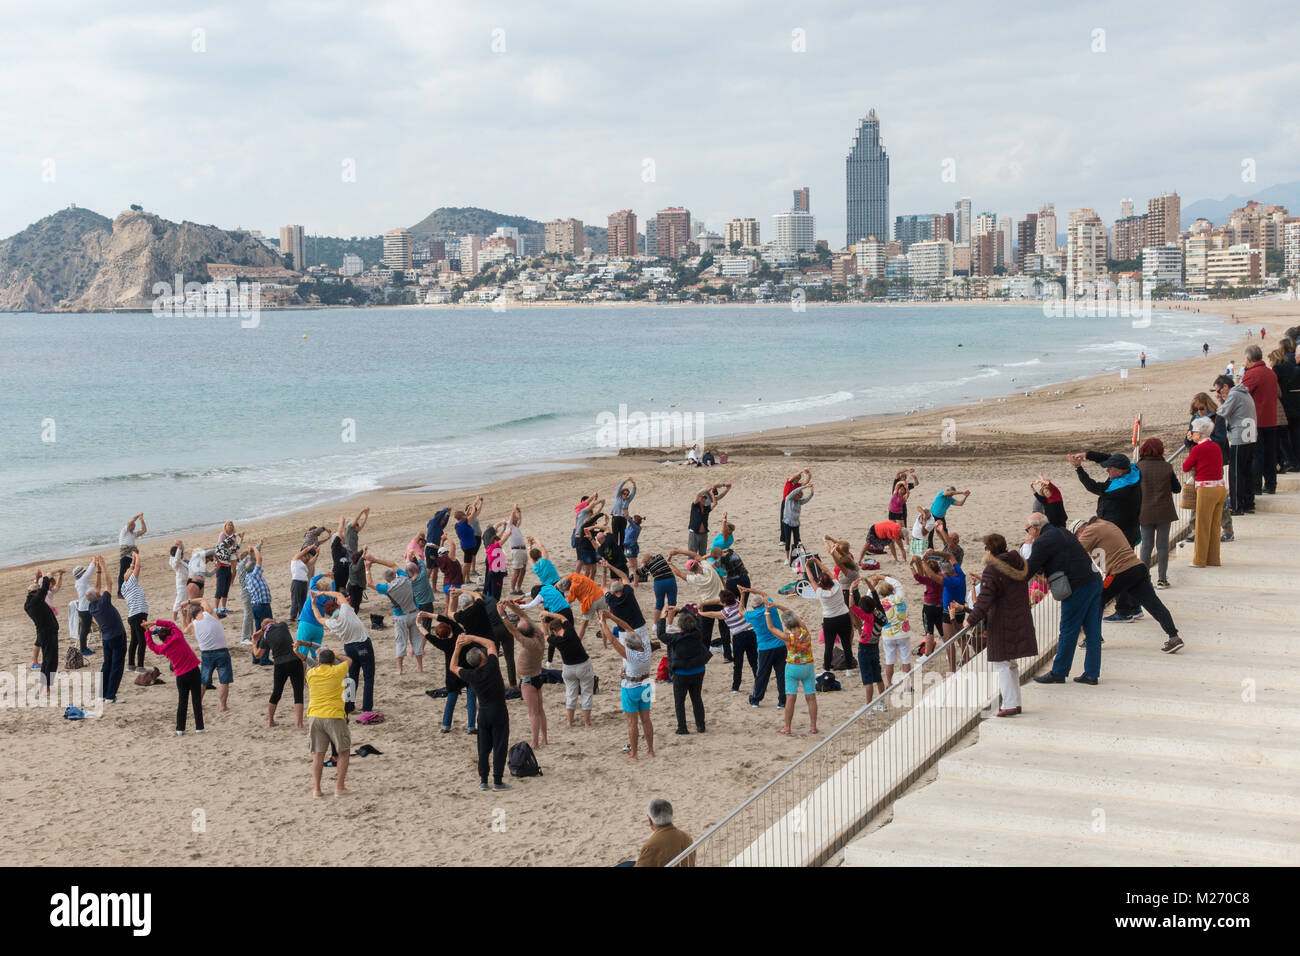 Seniors keeping fit on the beach in Benidorm, Spain. Men women oap's, elderly fitness class spectators watching and joining in. Stock Photo